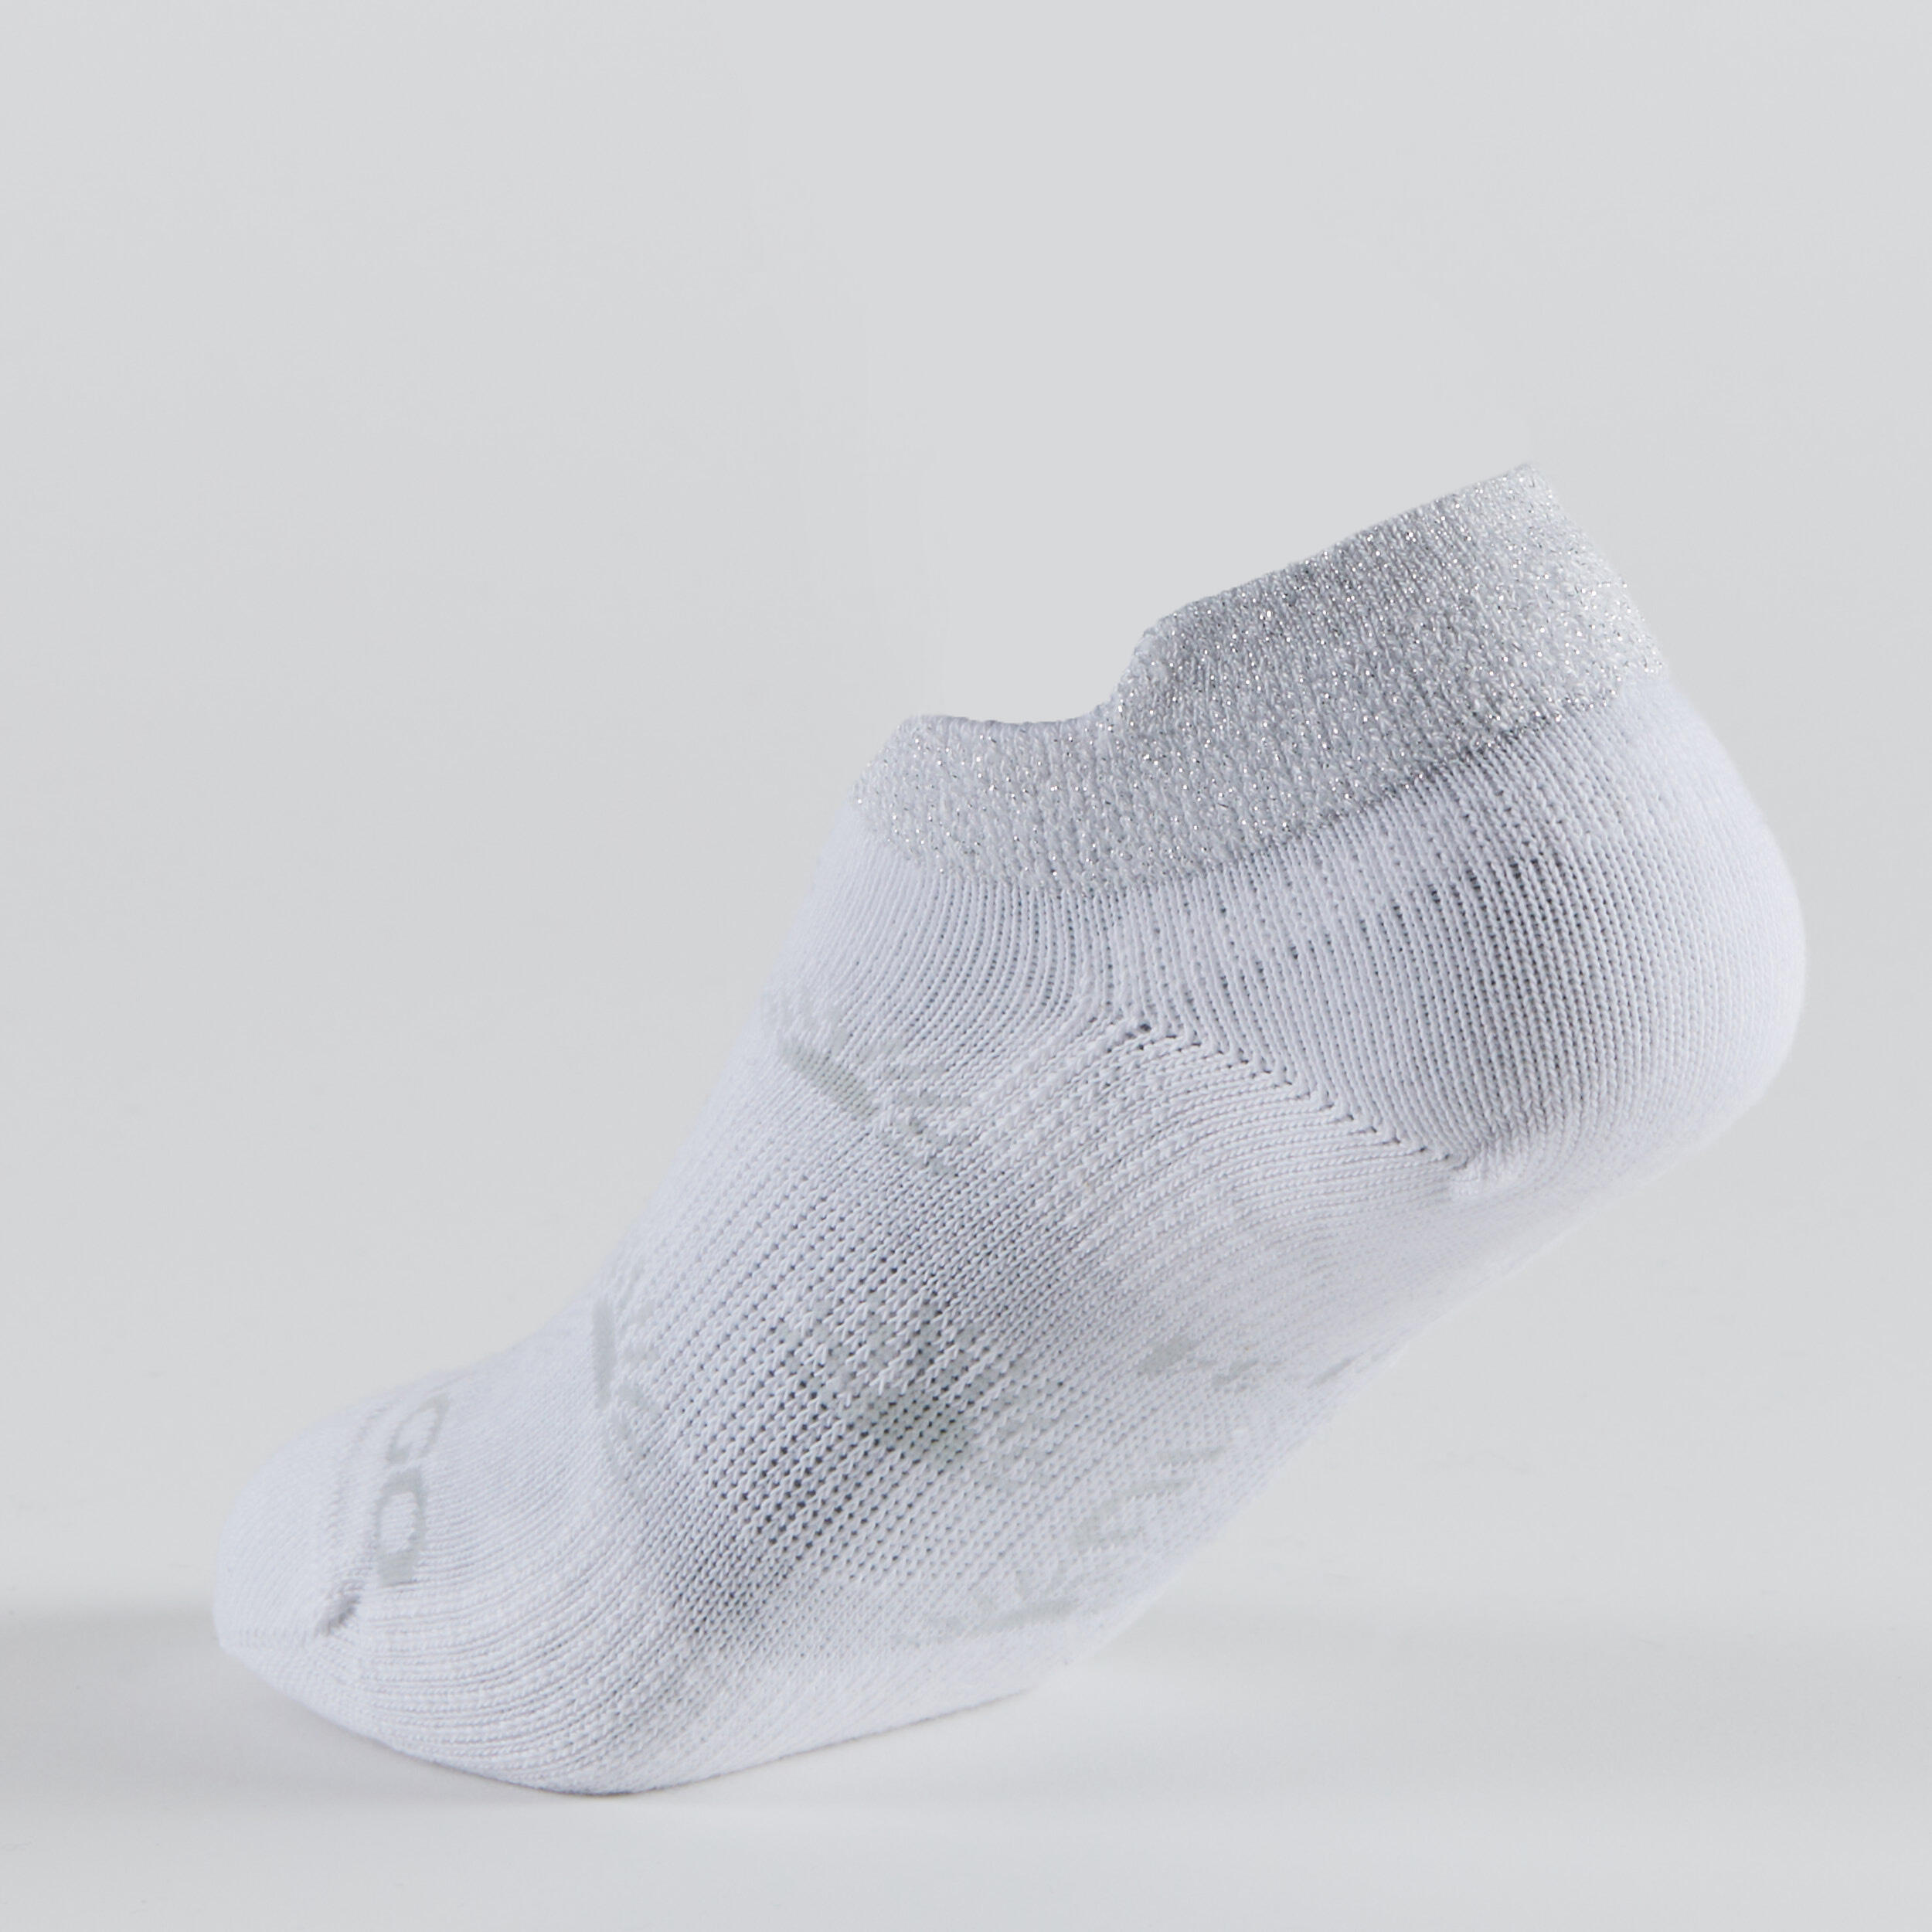 Kids' Low Tennis Socks Tri-Pack RS 160 - White with Patterns 10/14